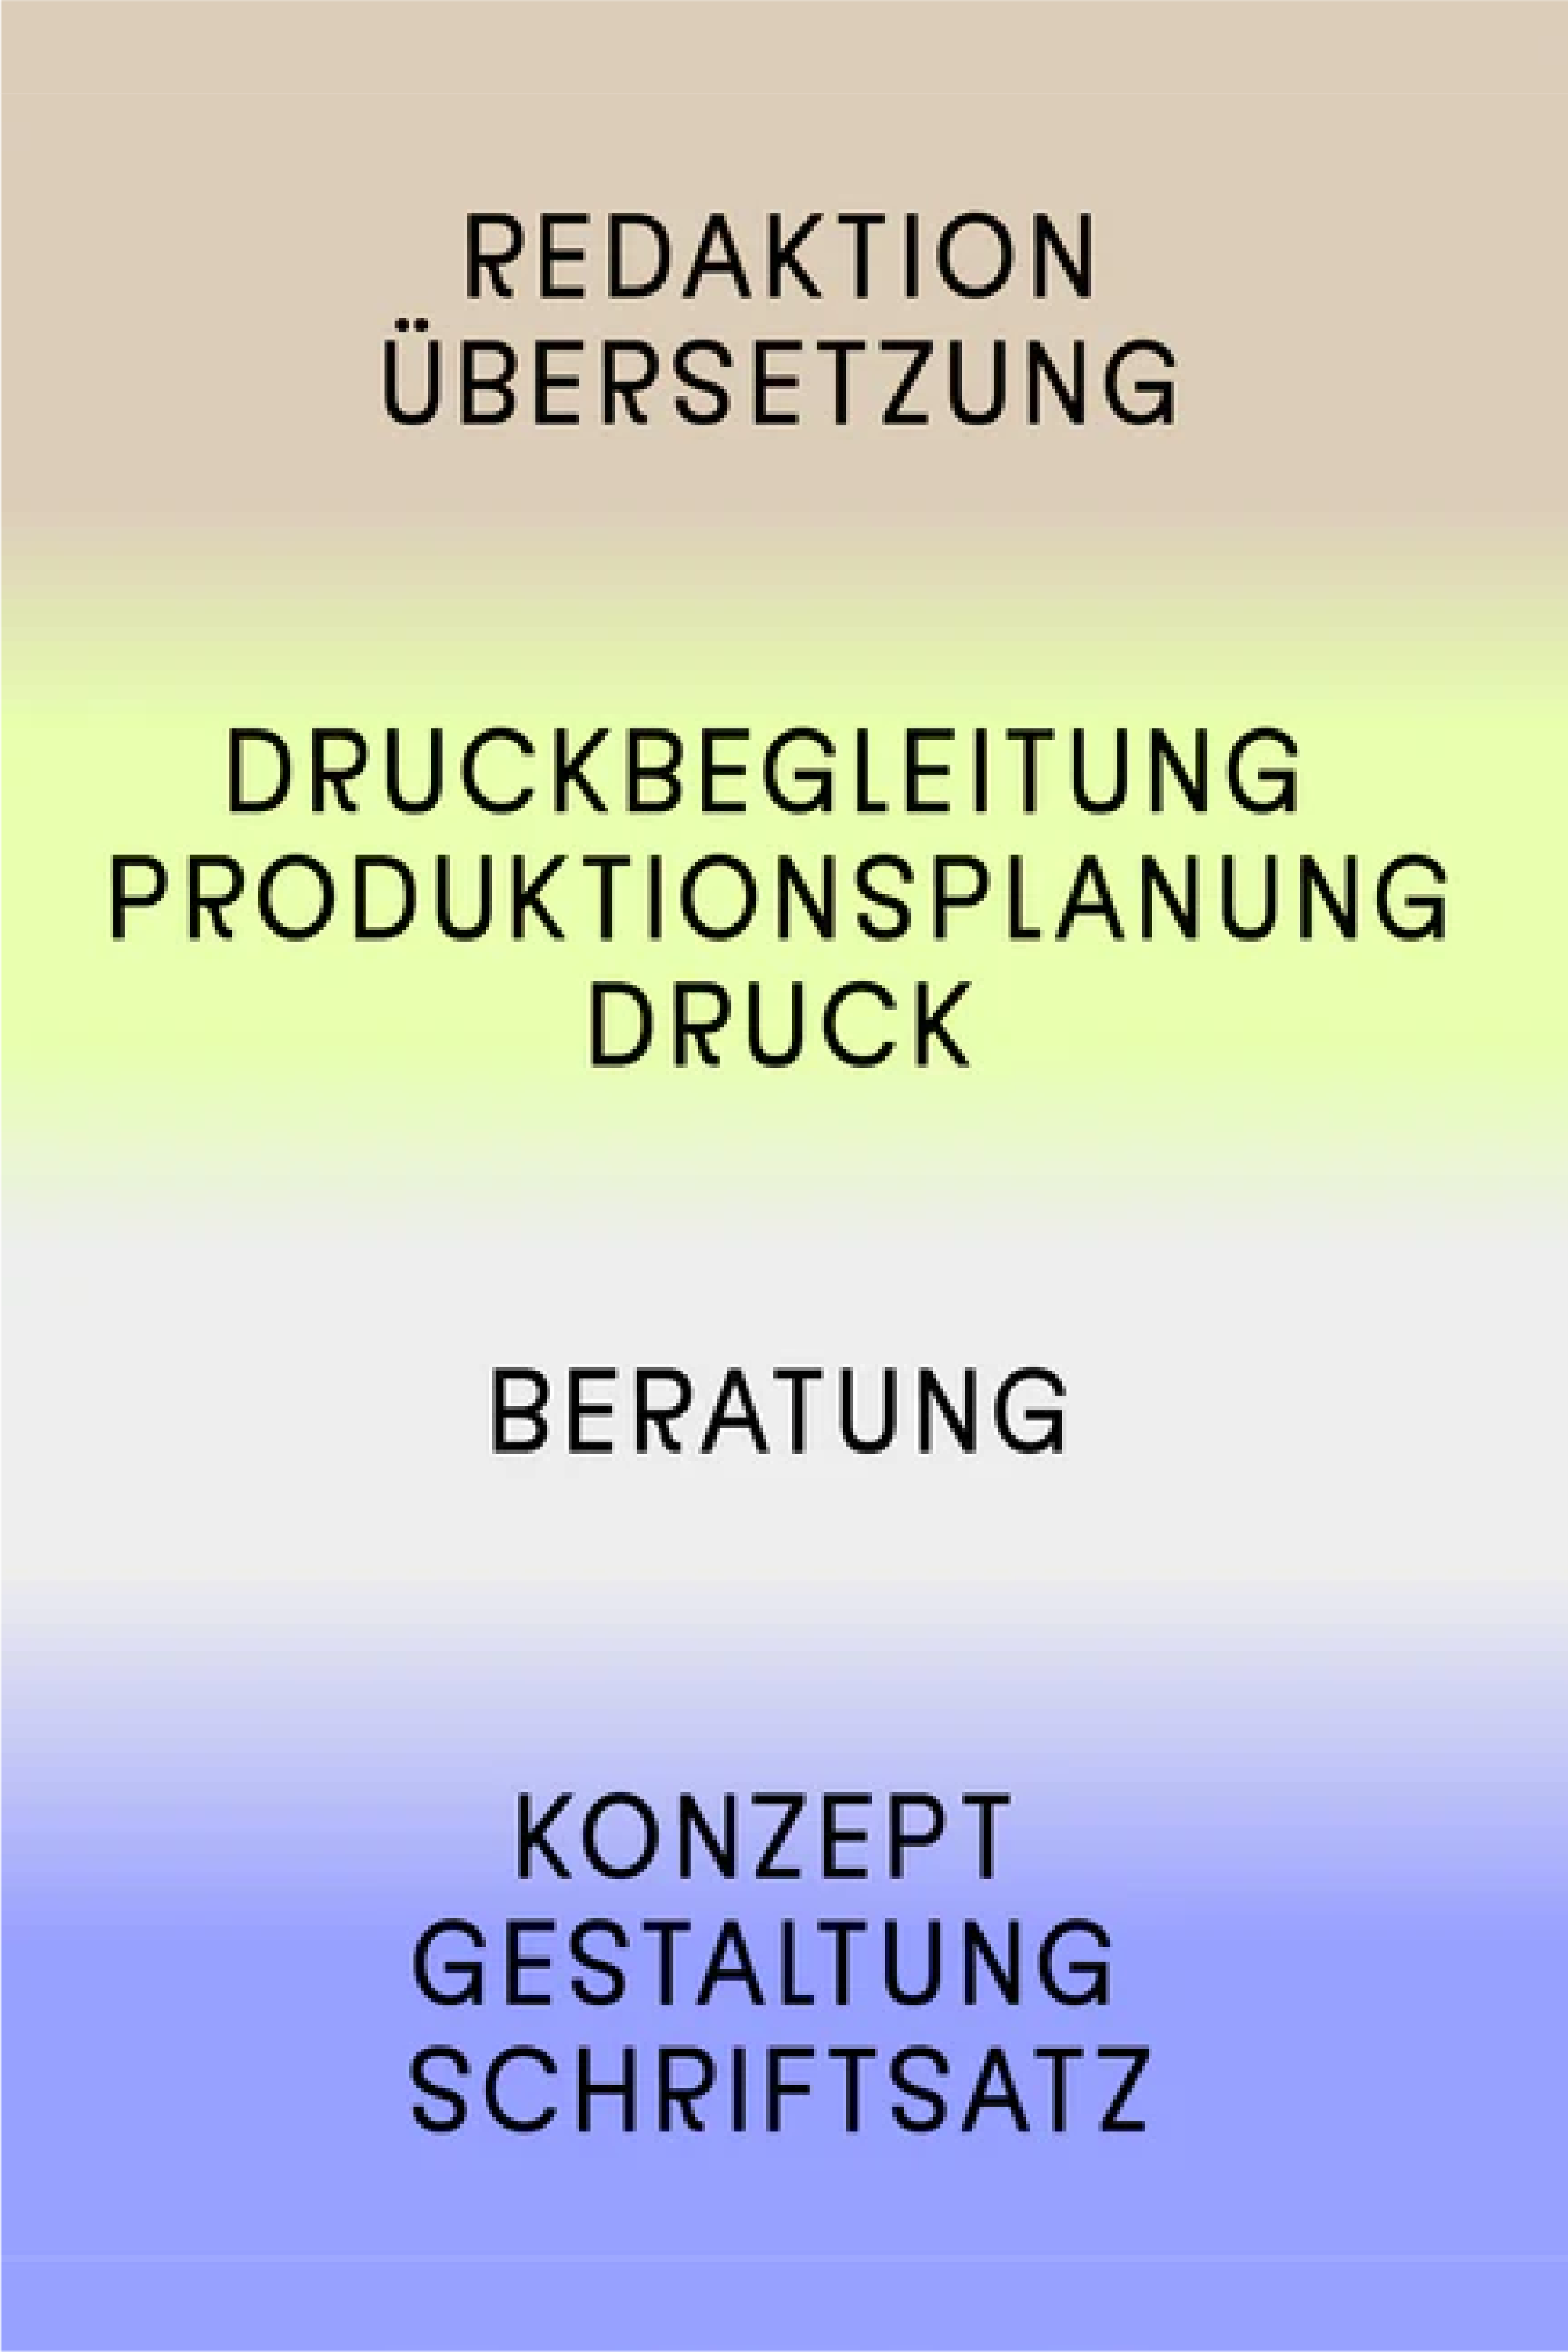 A diagram that shows the different services of the publishing house